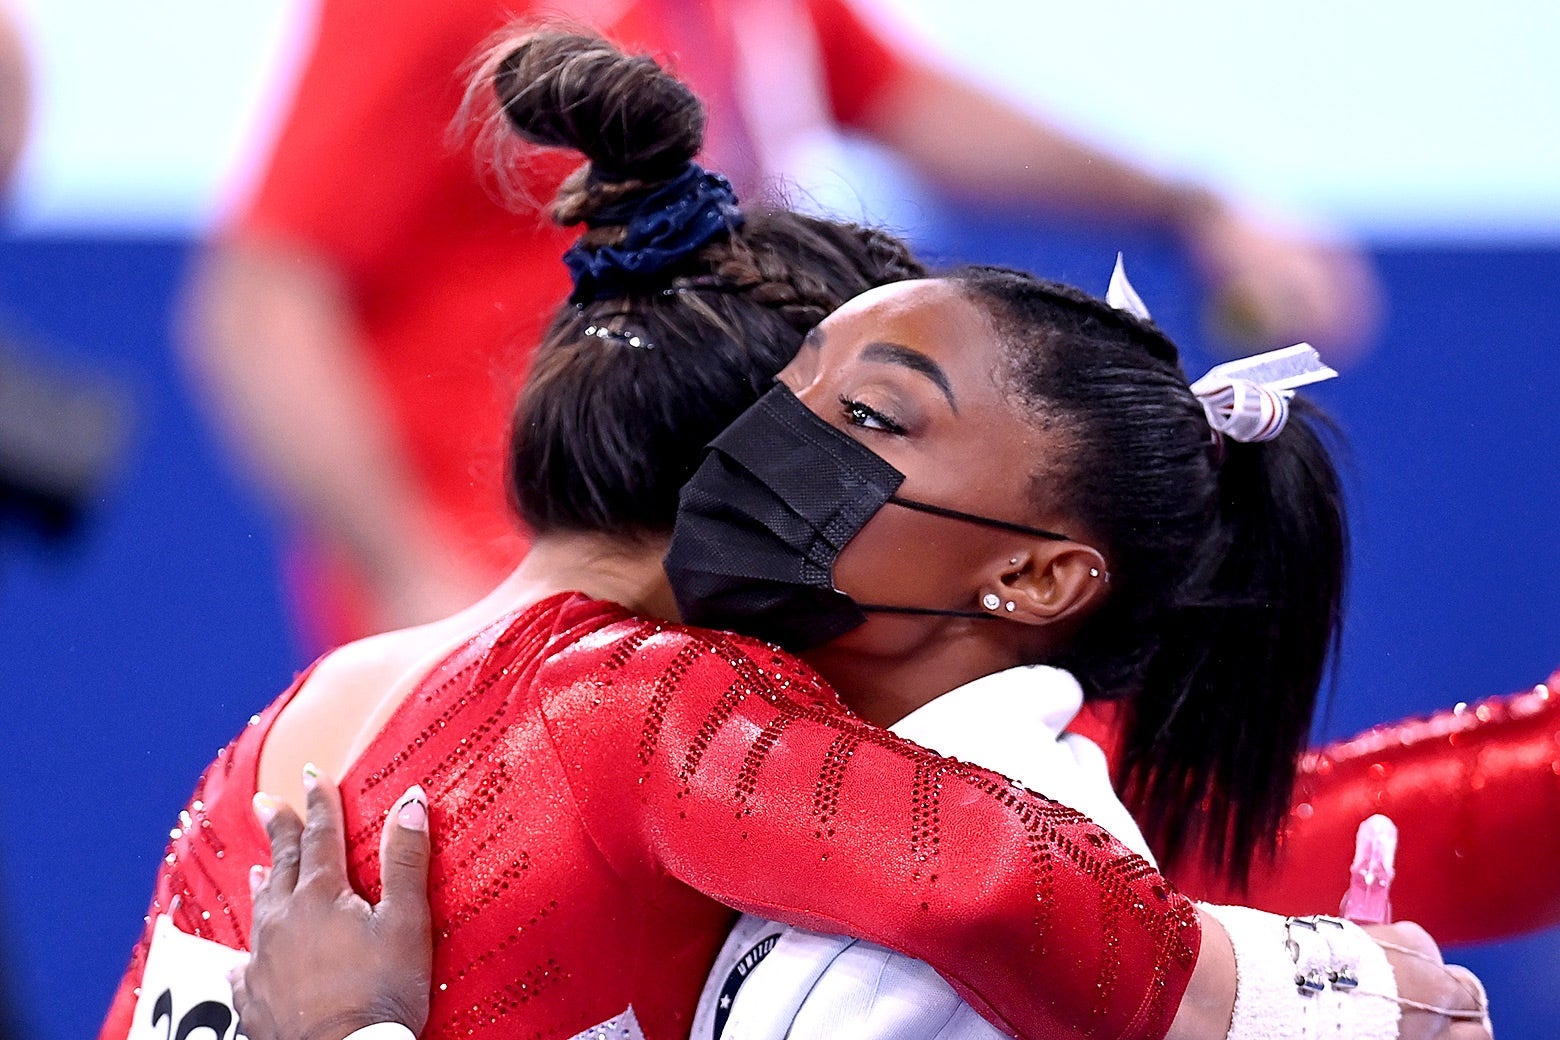 Biles wearing her warmup suit and a black mask hugs Sunisa Lee wearing a competition leotard